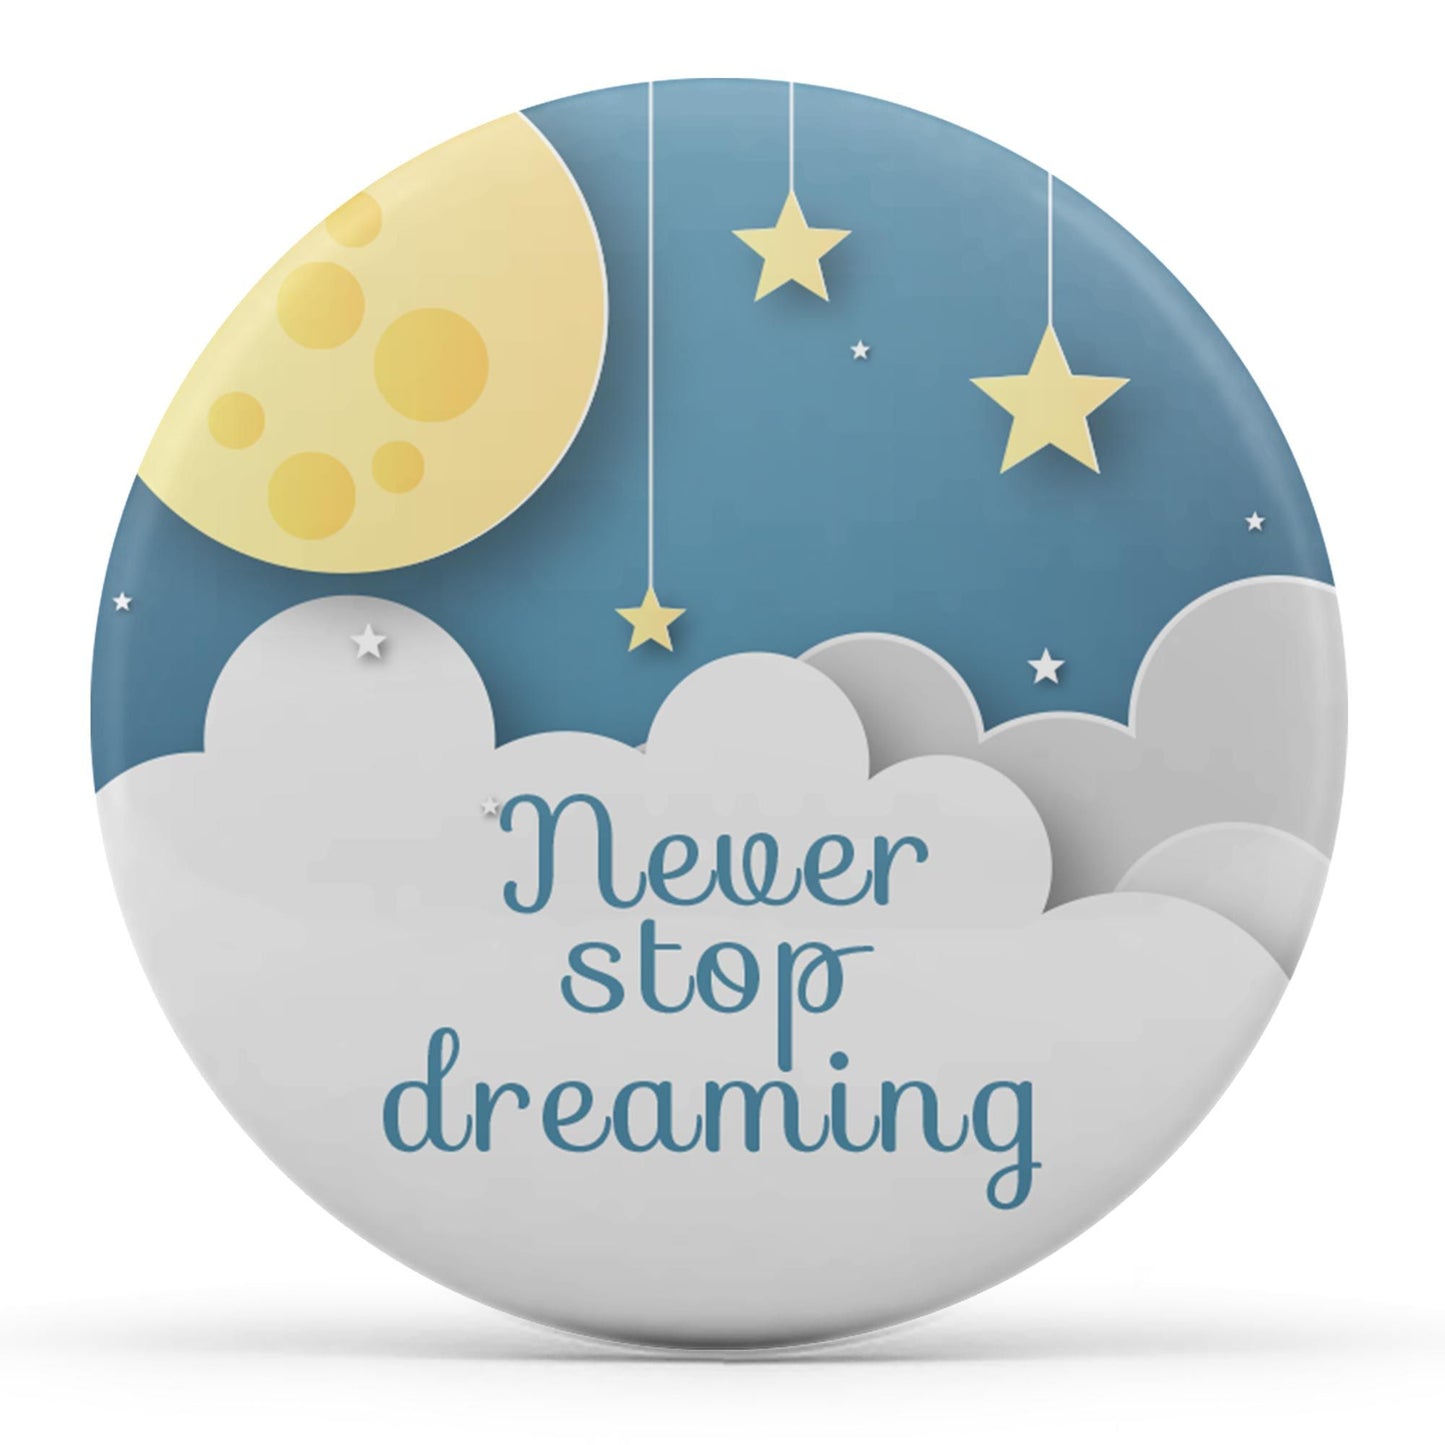 Never Stop Dreaming  Image